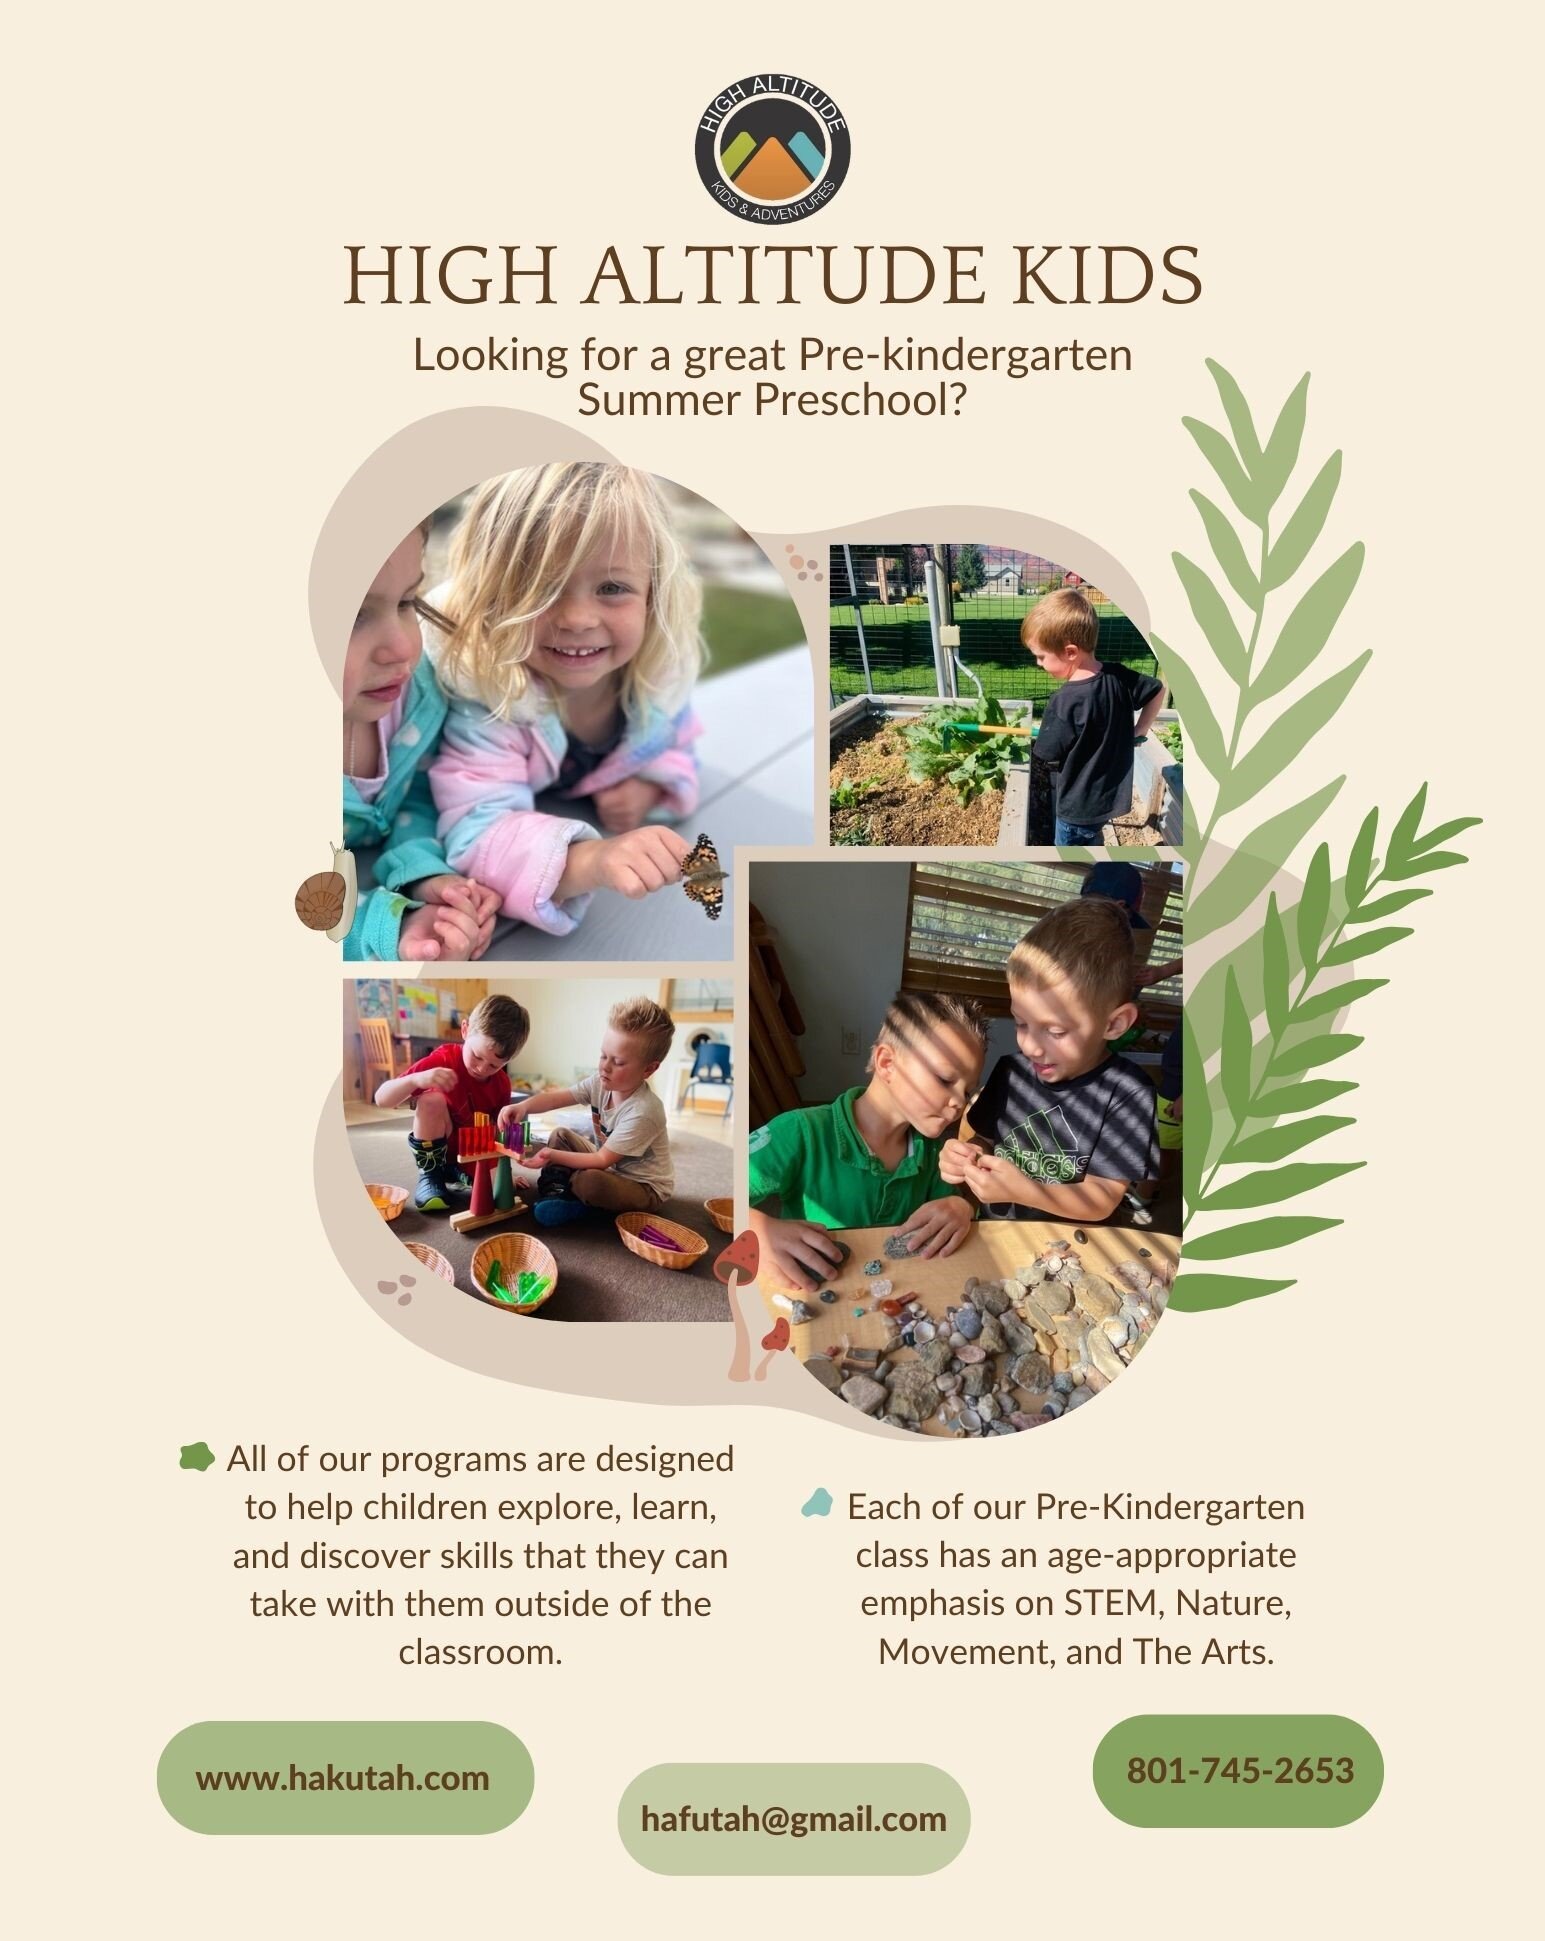 High Altitude Kids keeps your children busy learning and exploring all summer long!

HAK's Summer Program is OPEN! 

Each class has an age appropriate focus on STEM, The Arts, Movement, and Nature!

Find out more today!

#preschool #valleyelementarys